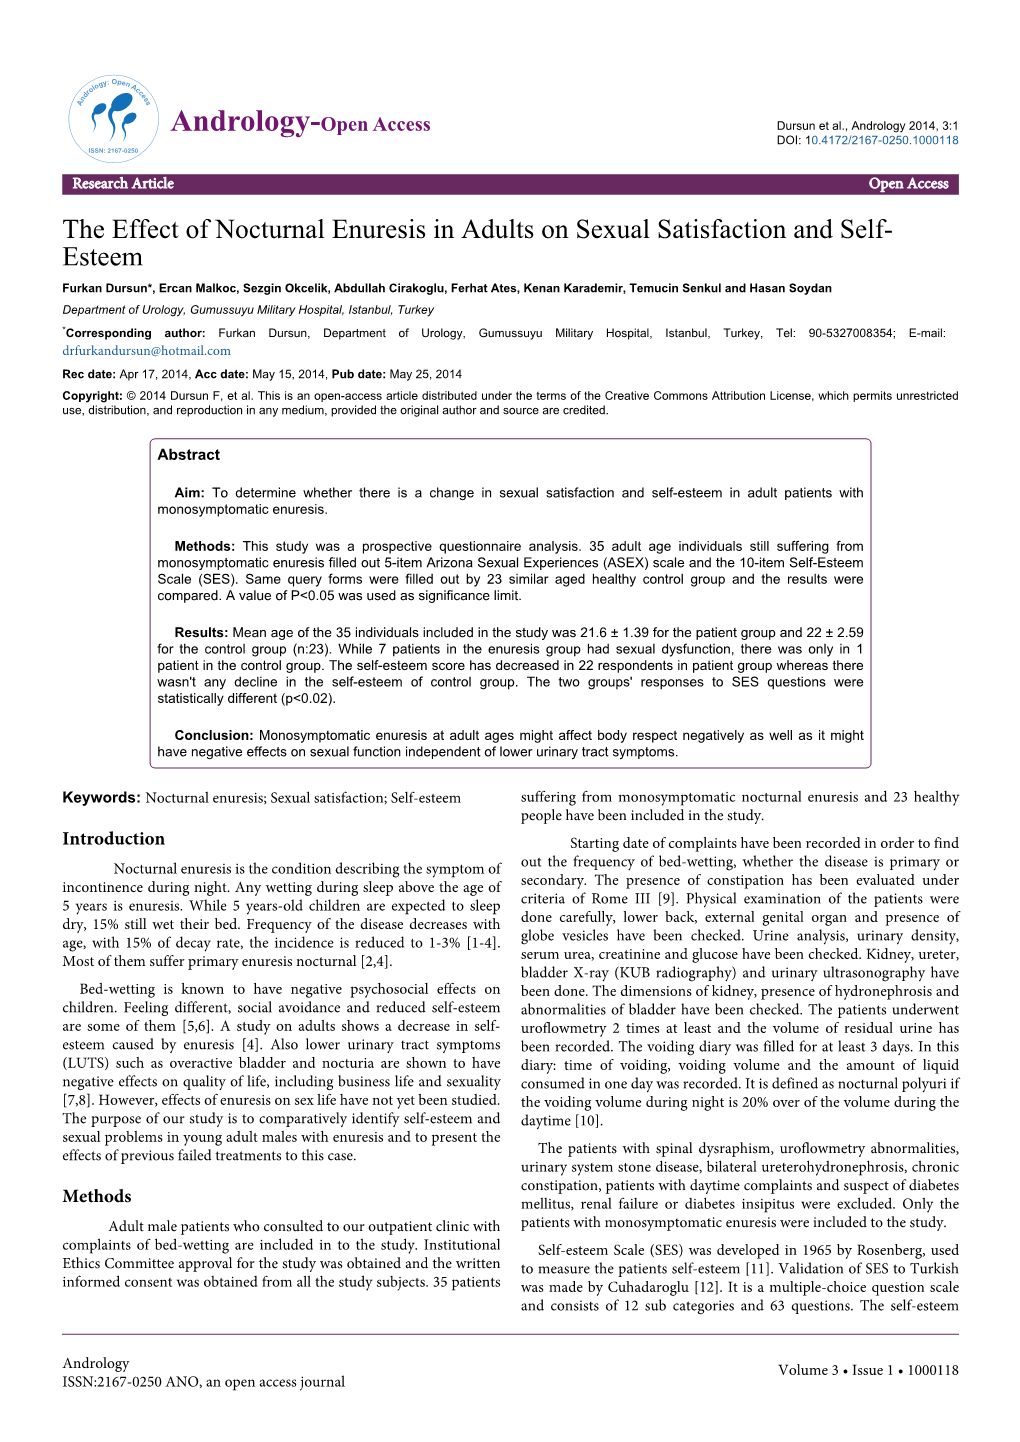 The Effect of Nocturnal Enuresis in Adults on Sexual Satisfaction and Self-Esteem